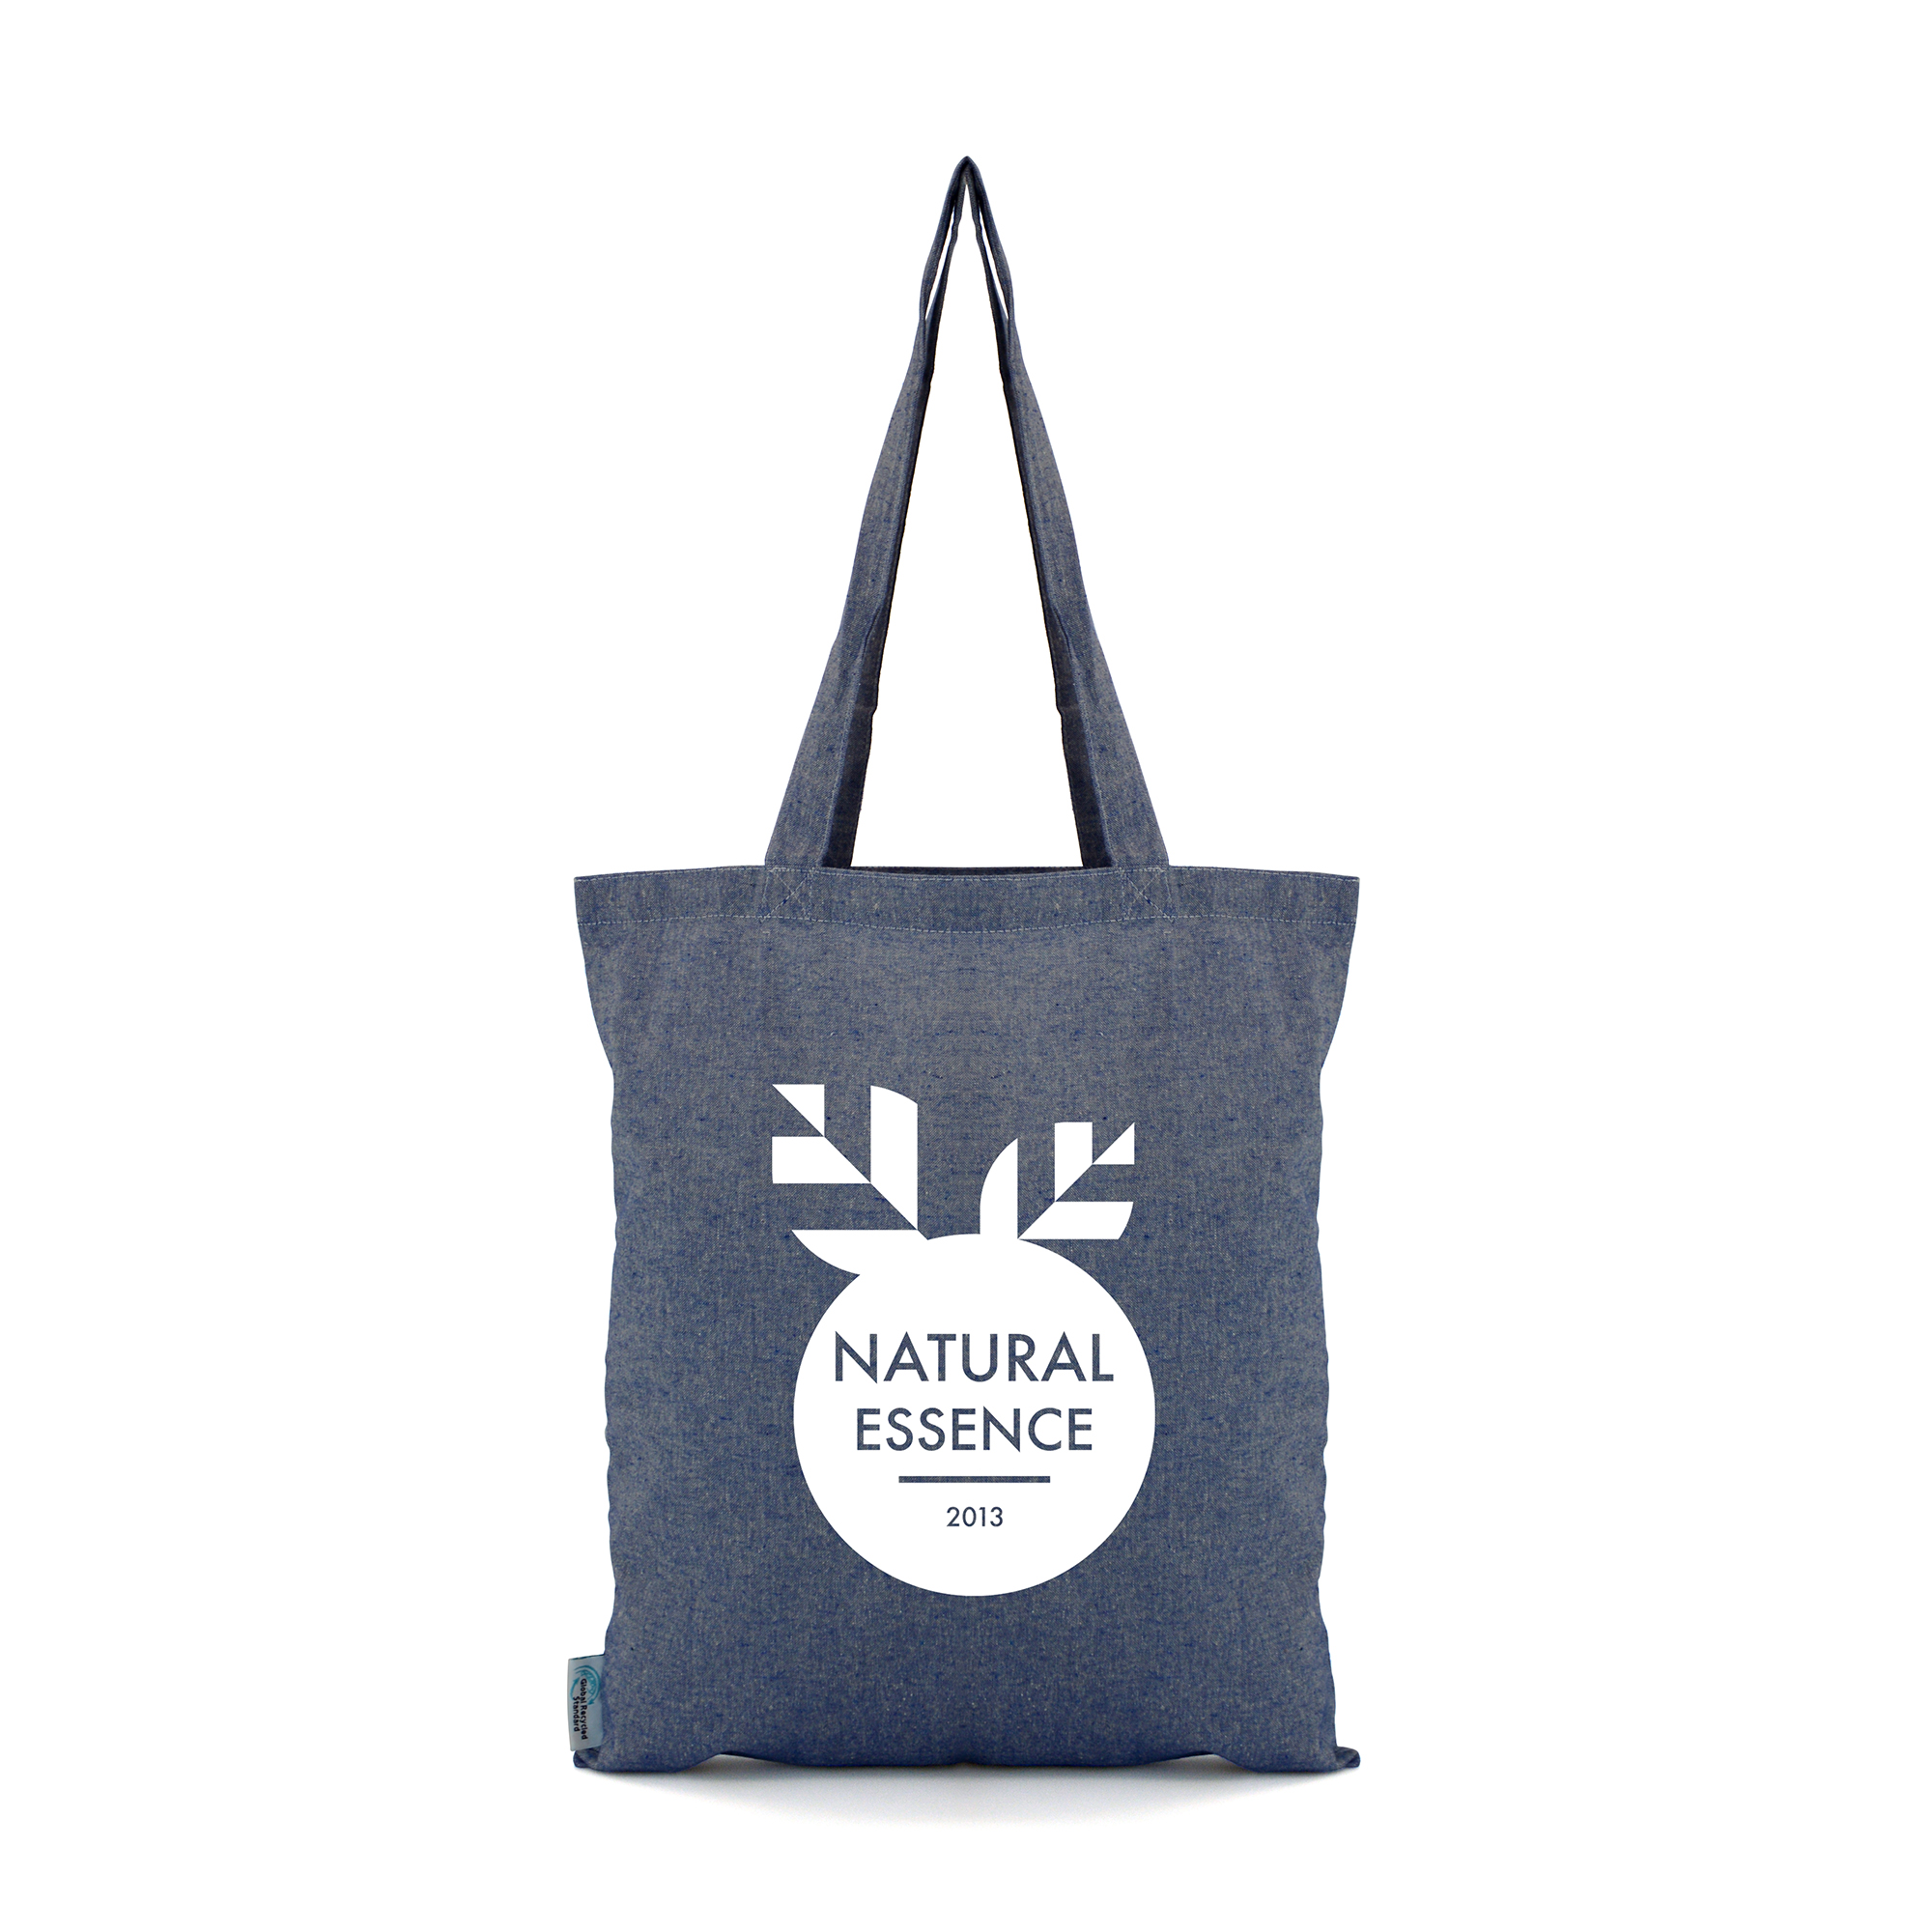 50% recycled 4oz cotton shopper with long handles. GRS compliant.